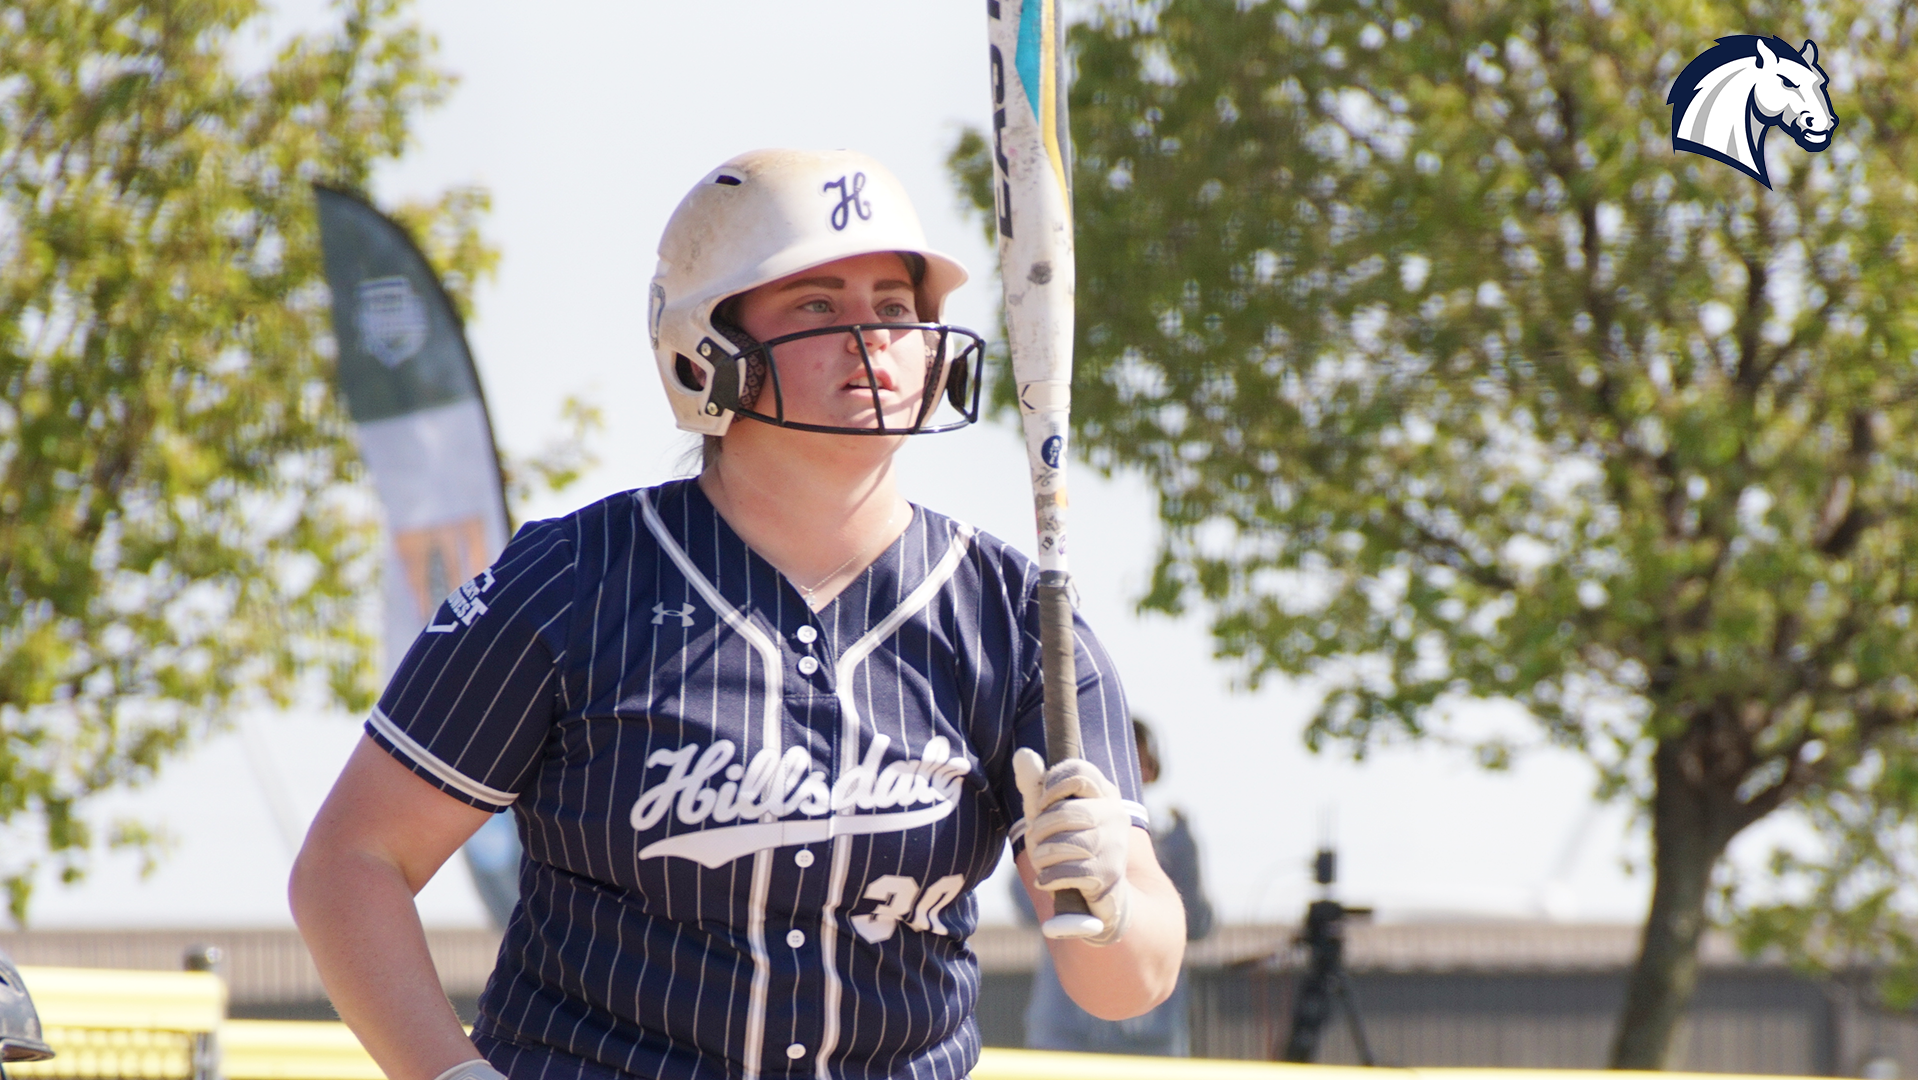 Huge sixth inning propels Hillsdale past Findlay, 4-0, and into G-MAC Championship Game